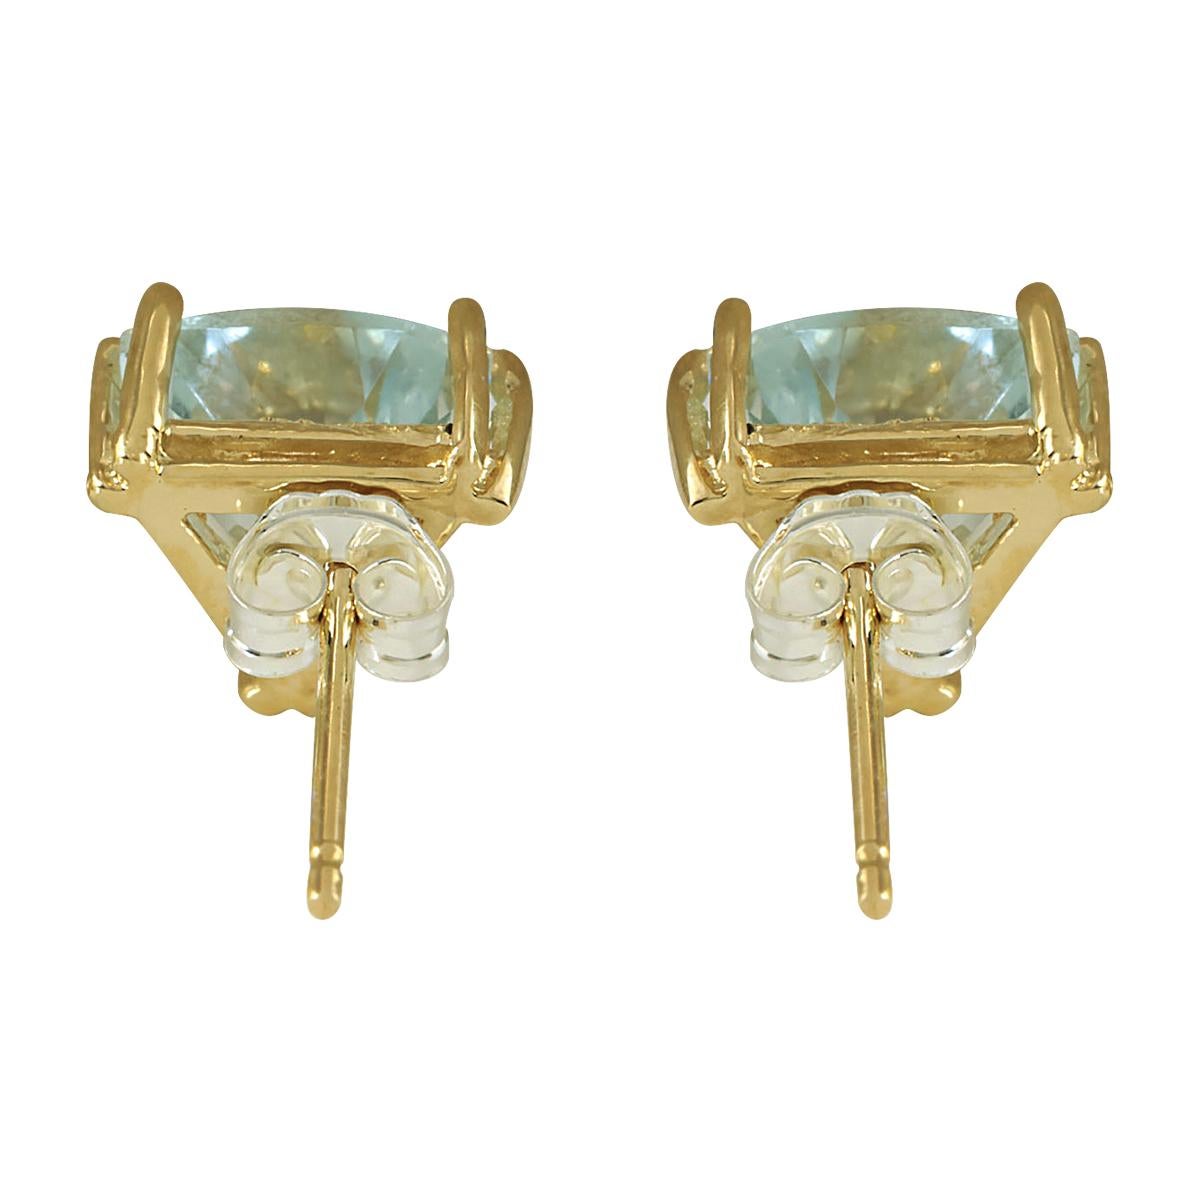 Stamped: 14K Yellow Gold
Total Earrings Weight: 1.6 Grams
Total Natural Aquamarine Weight is 2.11 Carat
Color: Blue
Face Measures: 8.00x8.00 mm
Sku: [702369W]